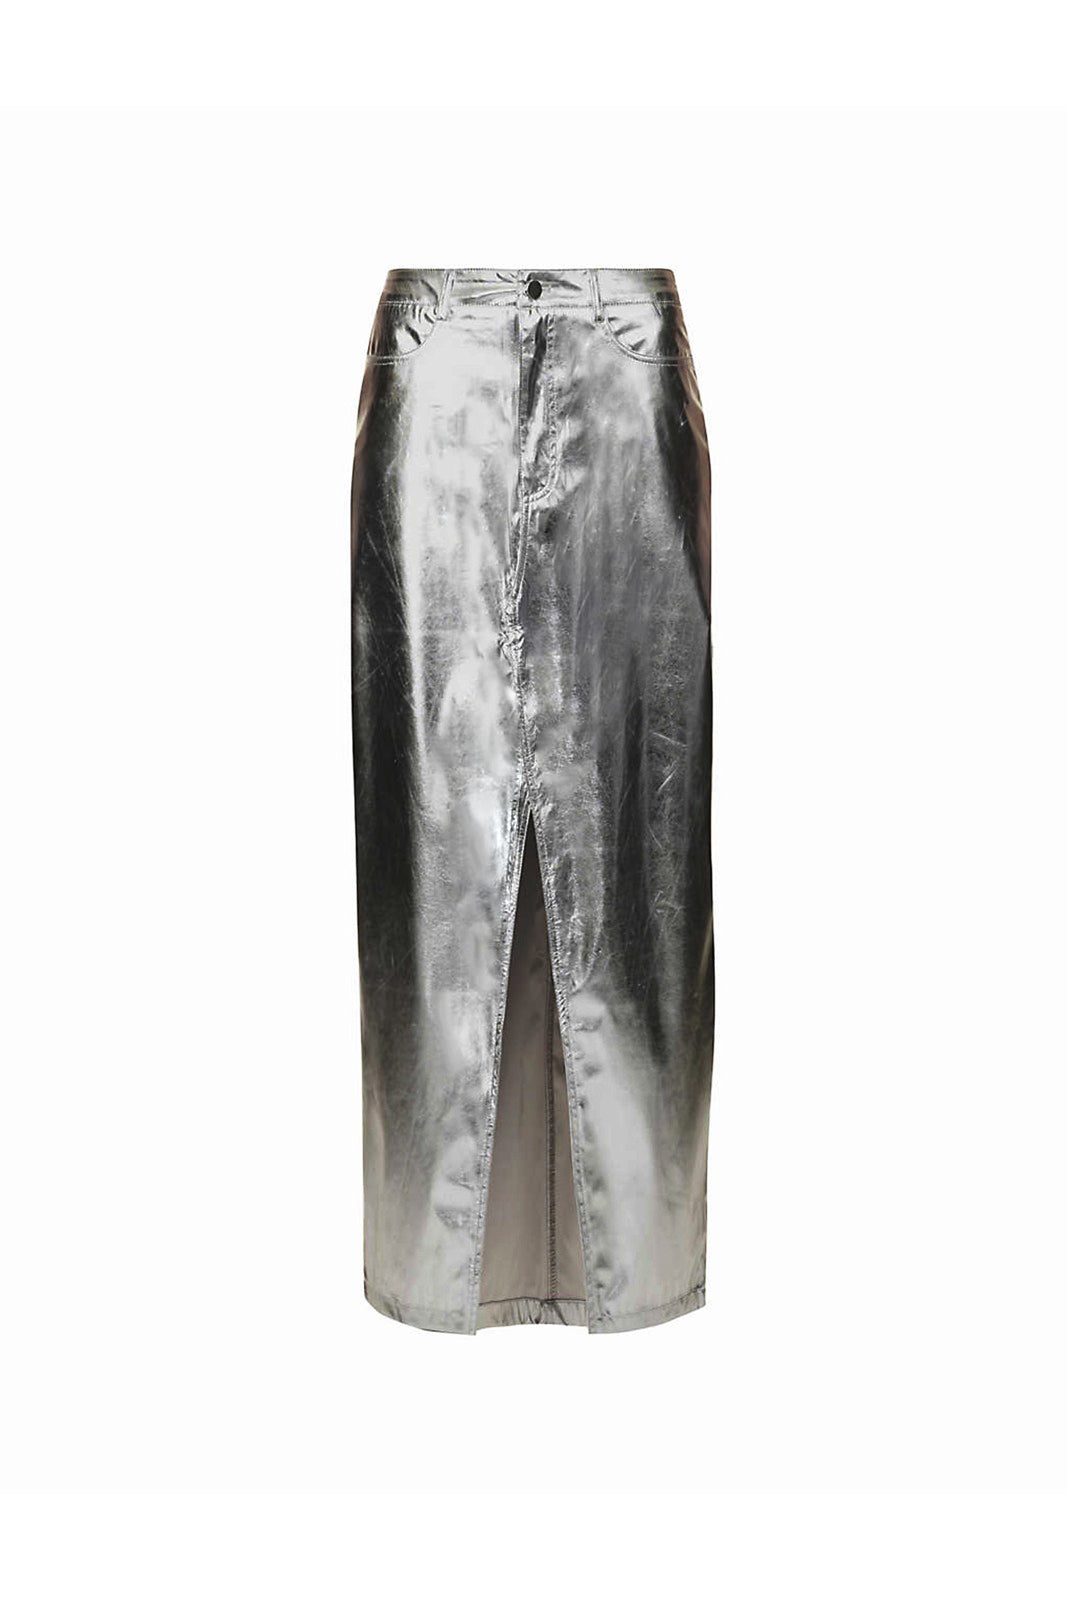 Lupe Shiny Silver Tailored High Waisted Metallic Faux Leather Maxi Skirt